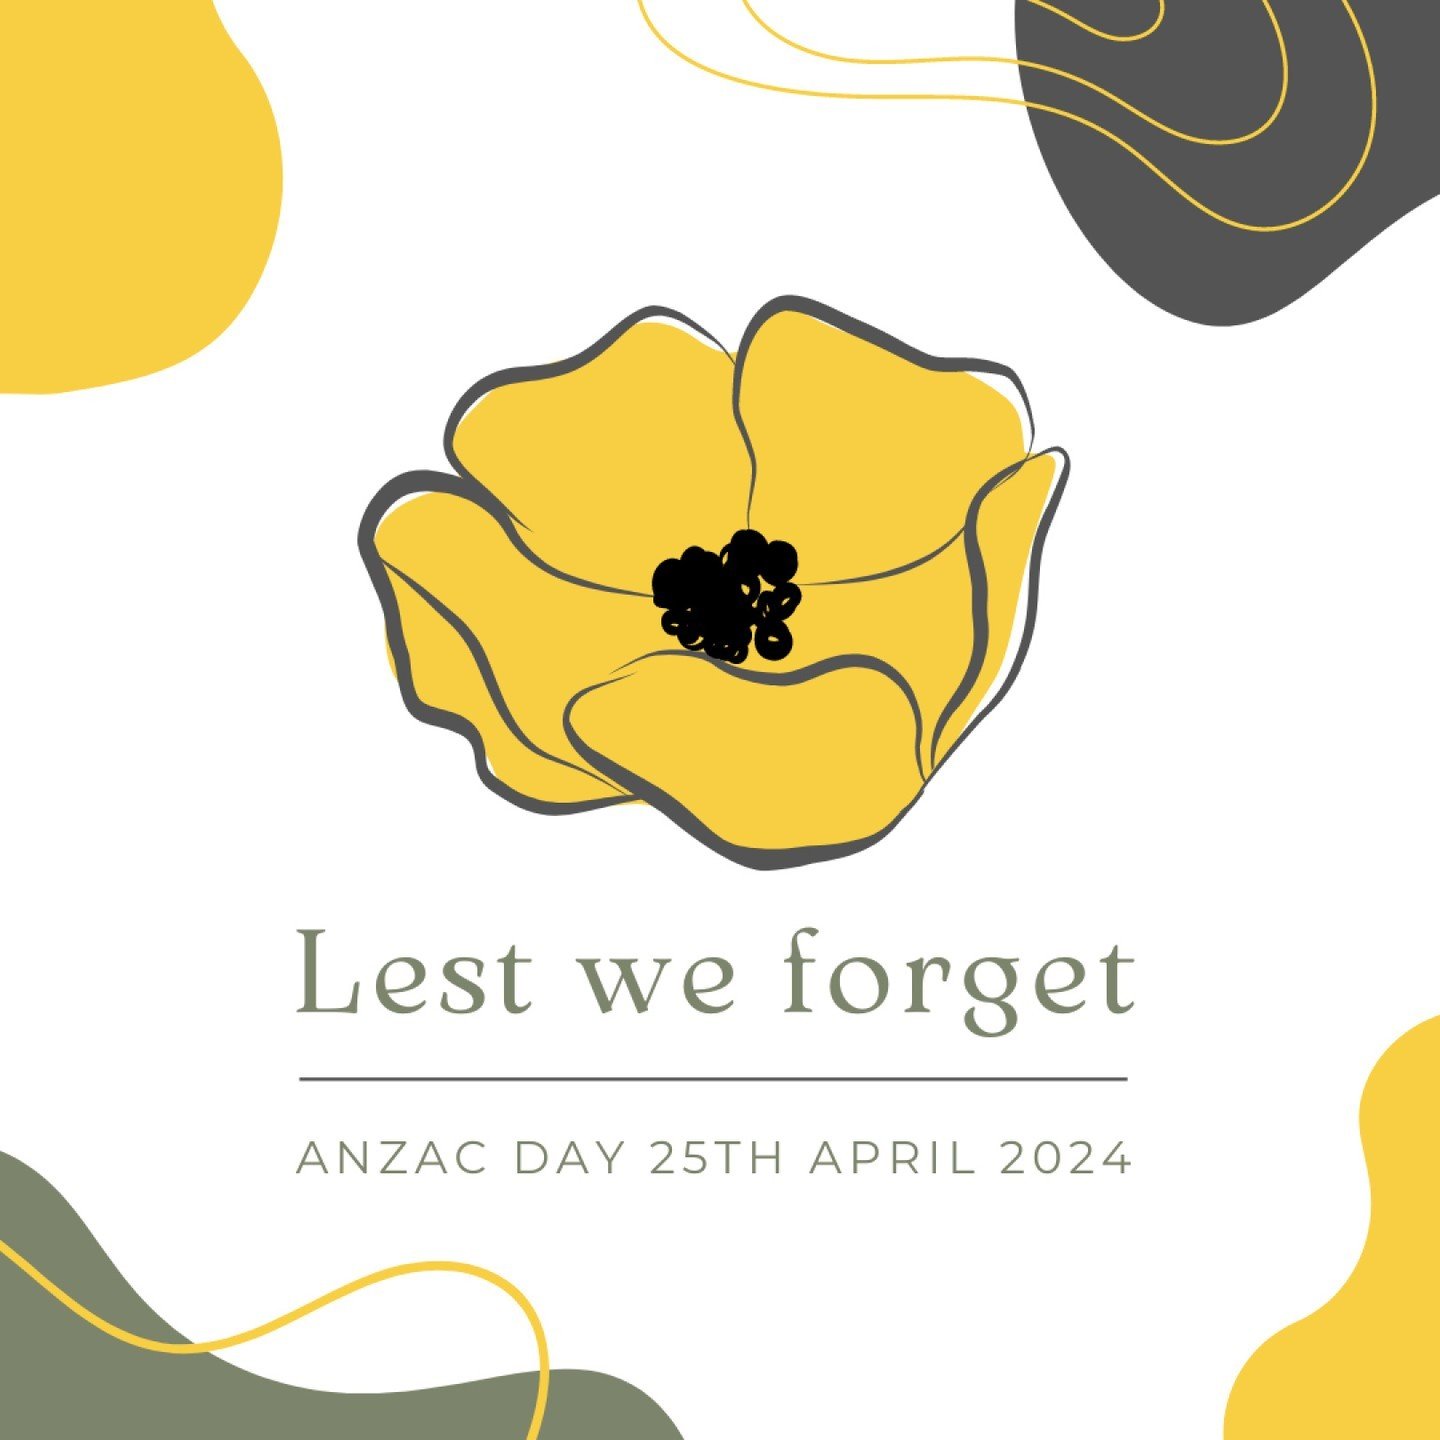 They shall grow not old,
as we that are left grow old;
Age shall not weary them,
nor the years condemn.
At the going down of the sun
and in the morning
We will remember them.